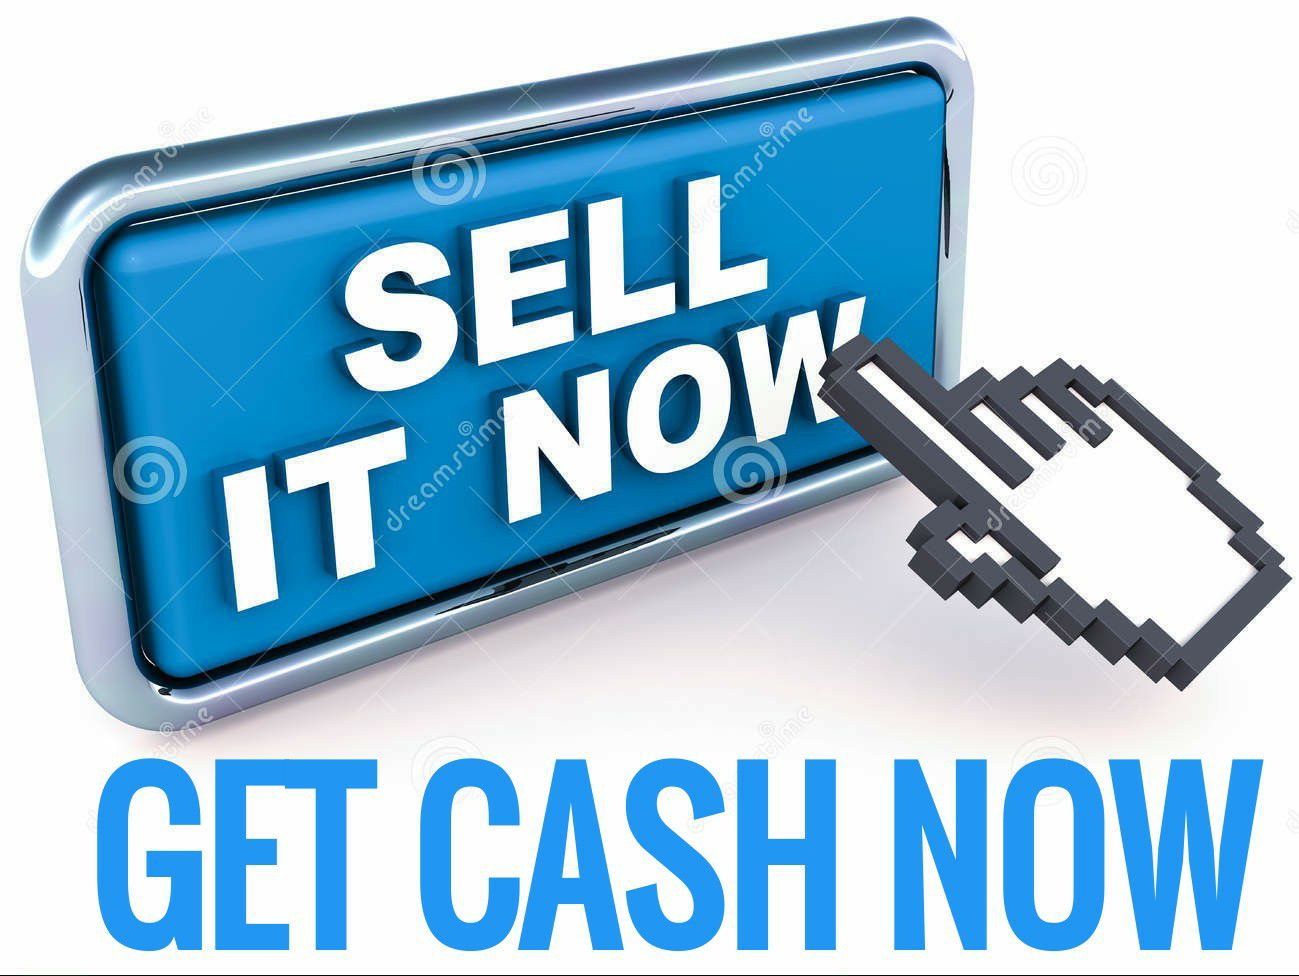 Fast Cash. Car Truck Motorcycle Electronics Tools Power Equipment Furniture Household Etc..